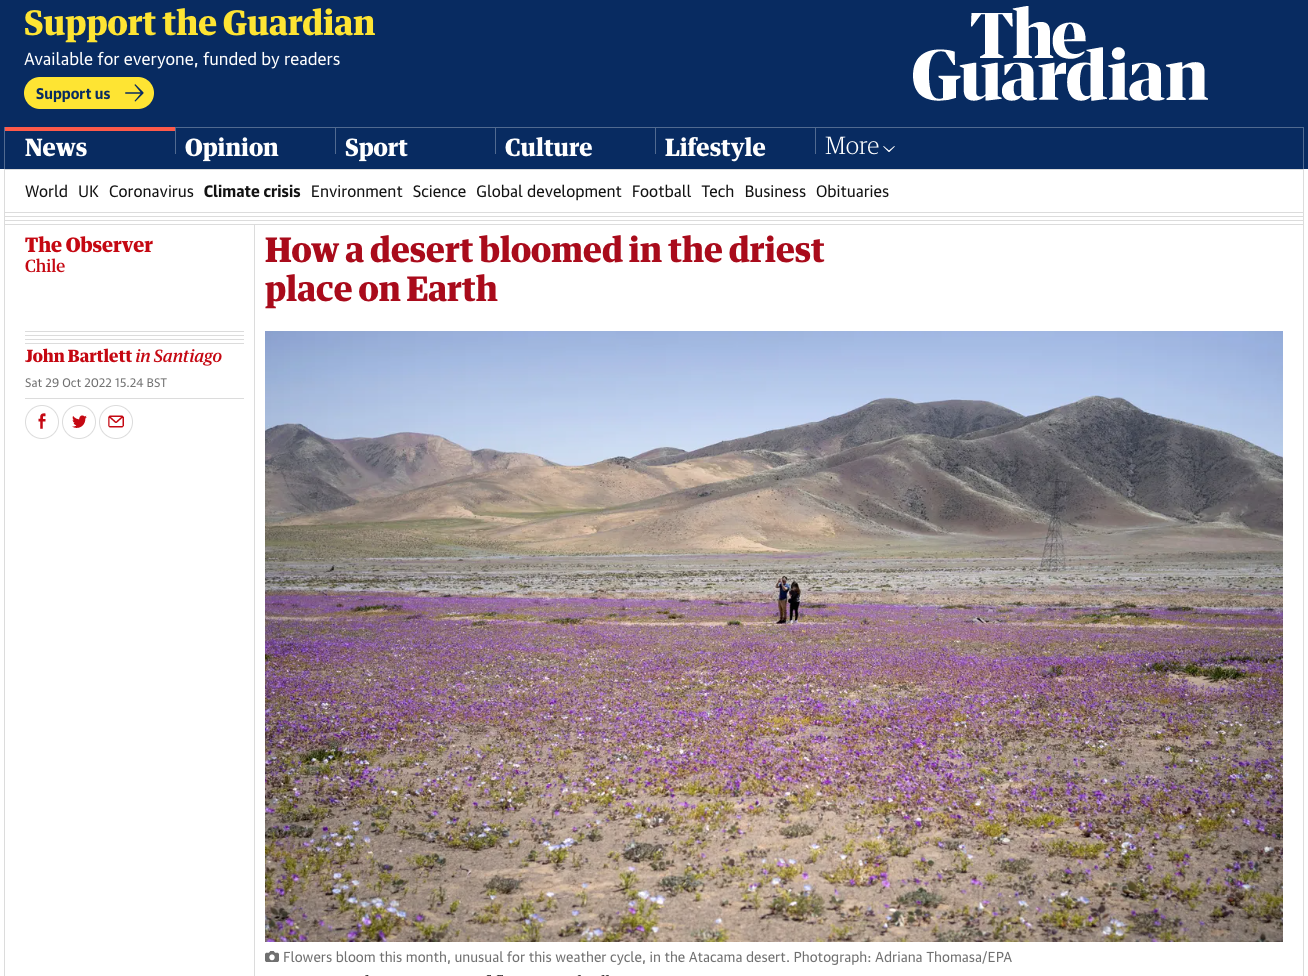 The Guardian: How a desert bloomed in the driest place on Earth